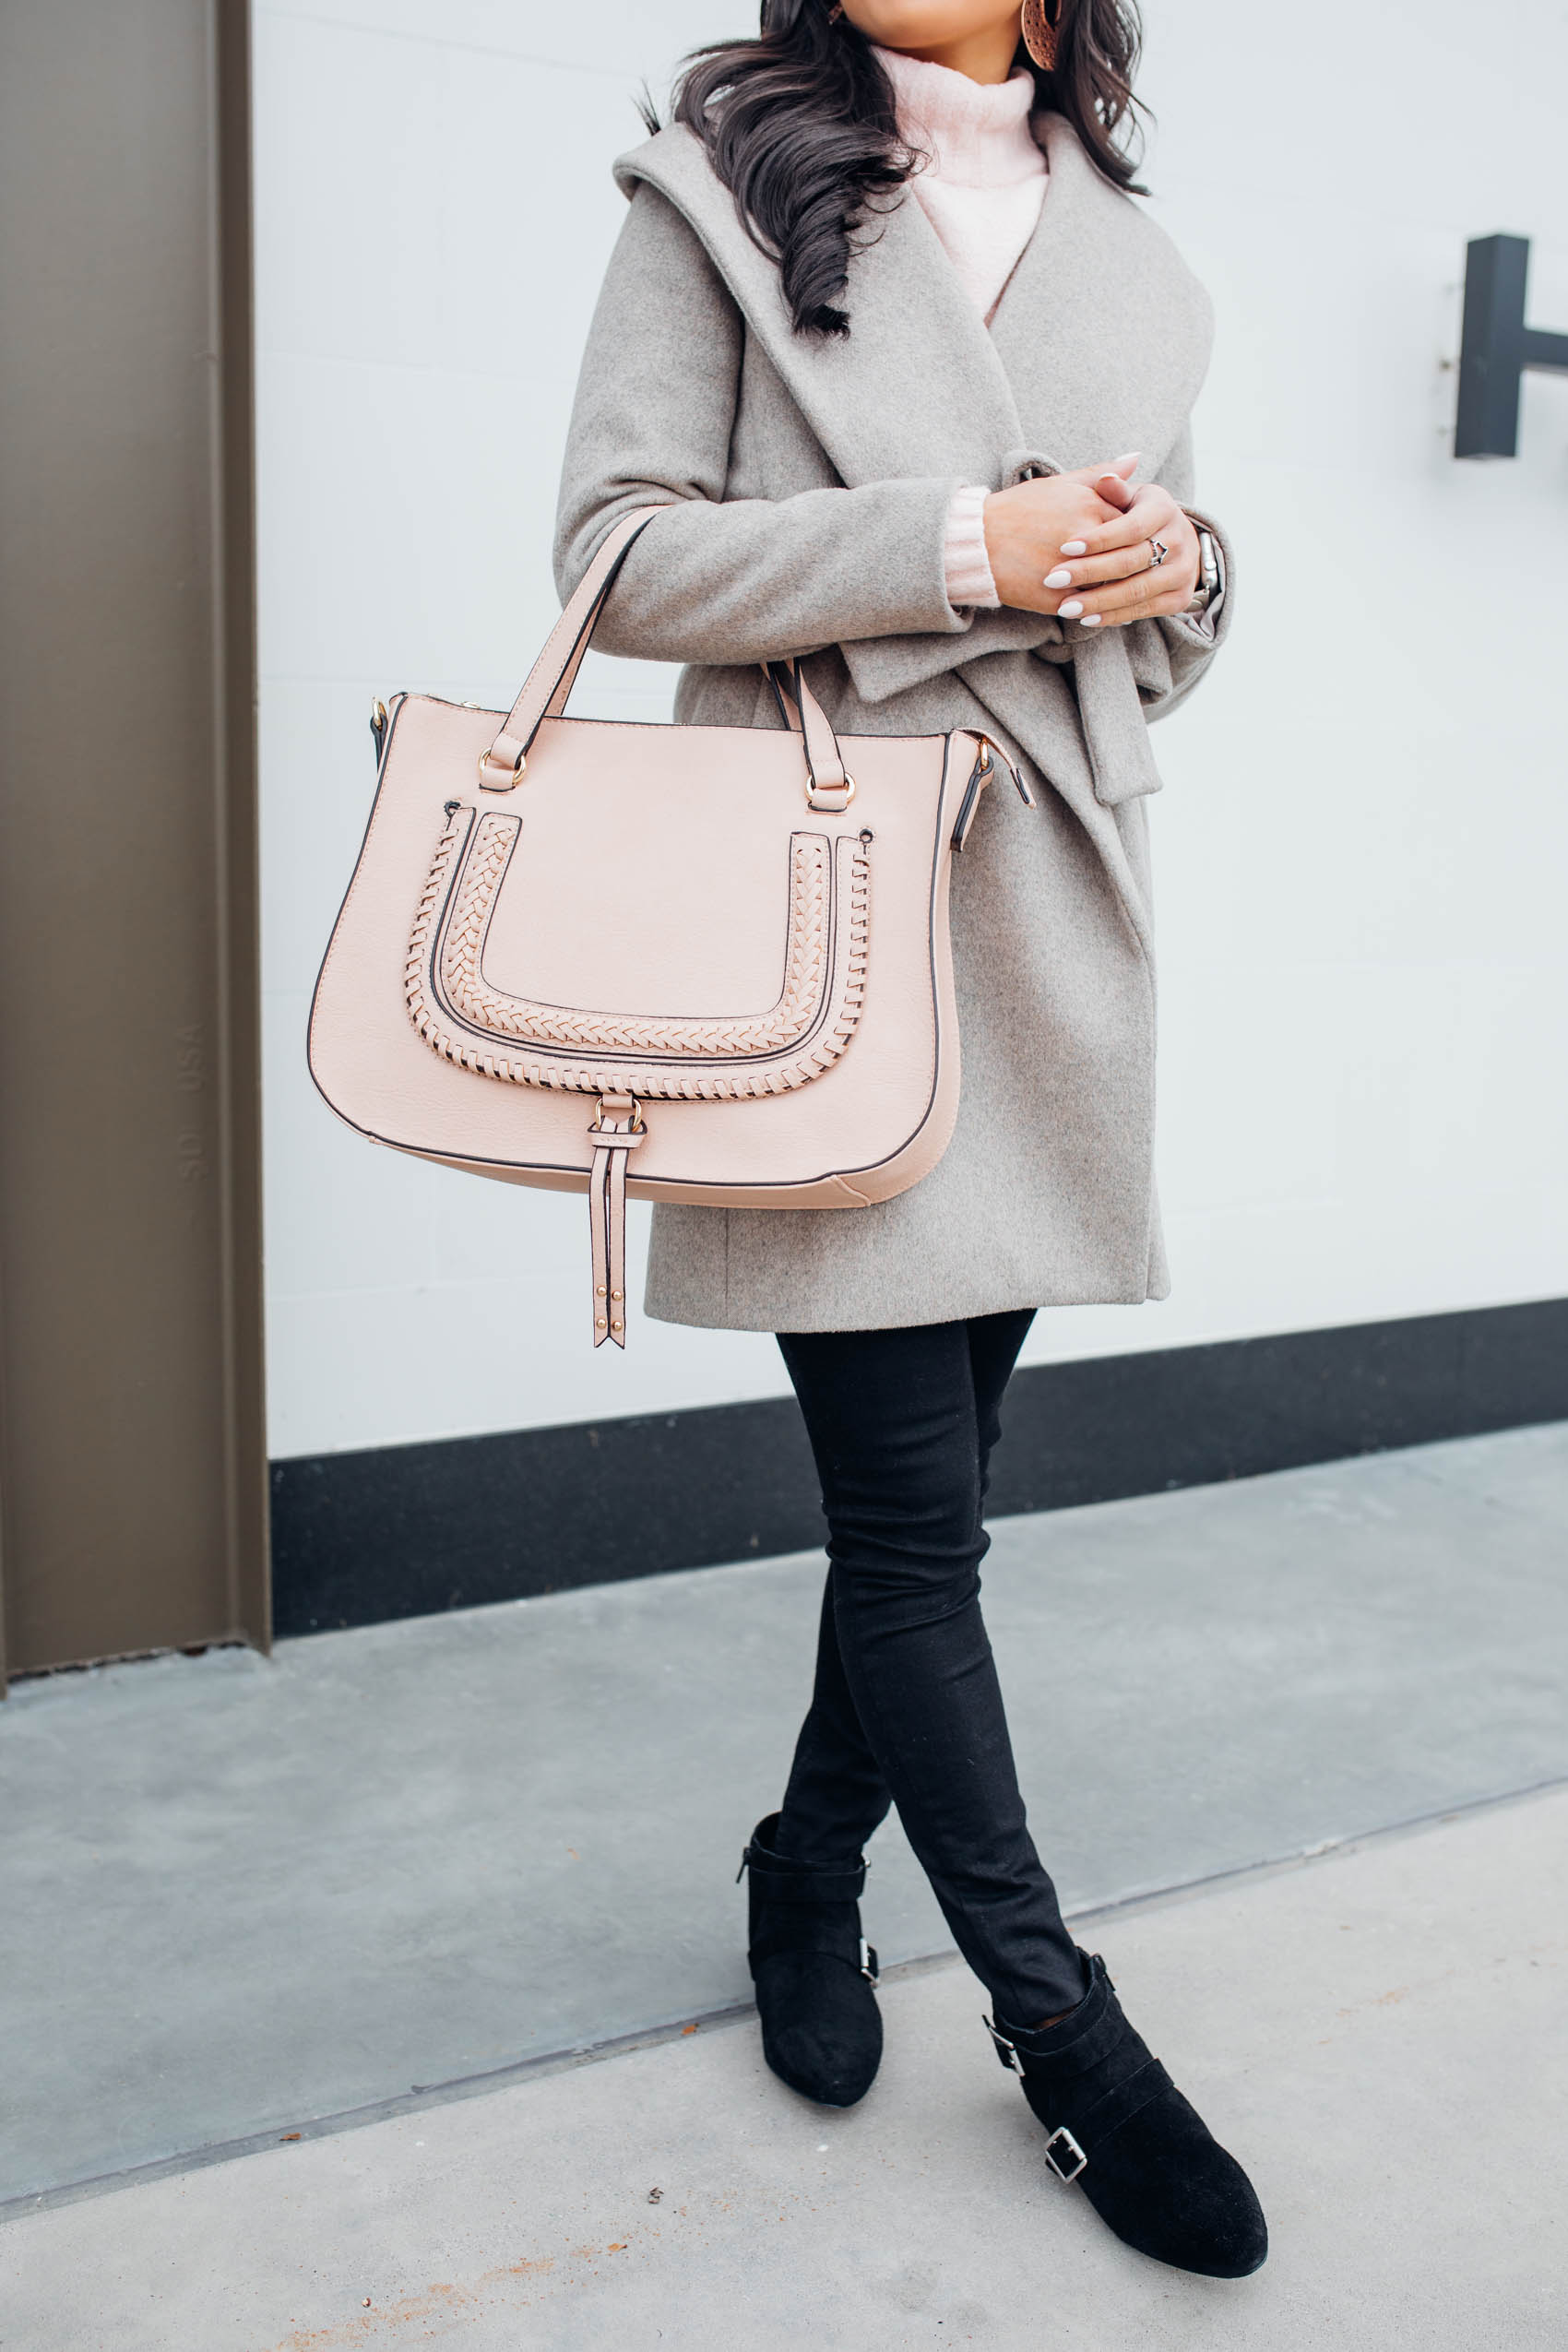 Blogger Hoang-Kim wears a vegan leather handbag and suede booties by Sole Society